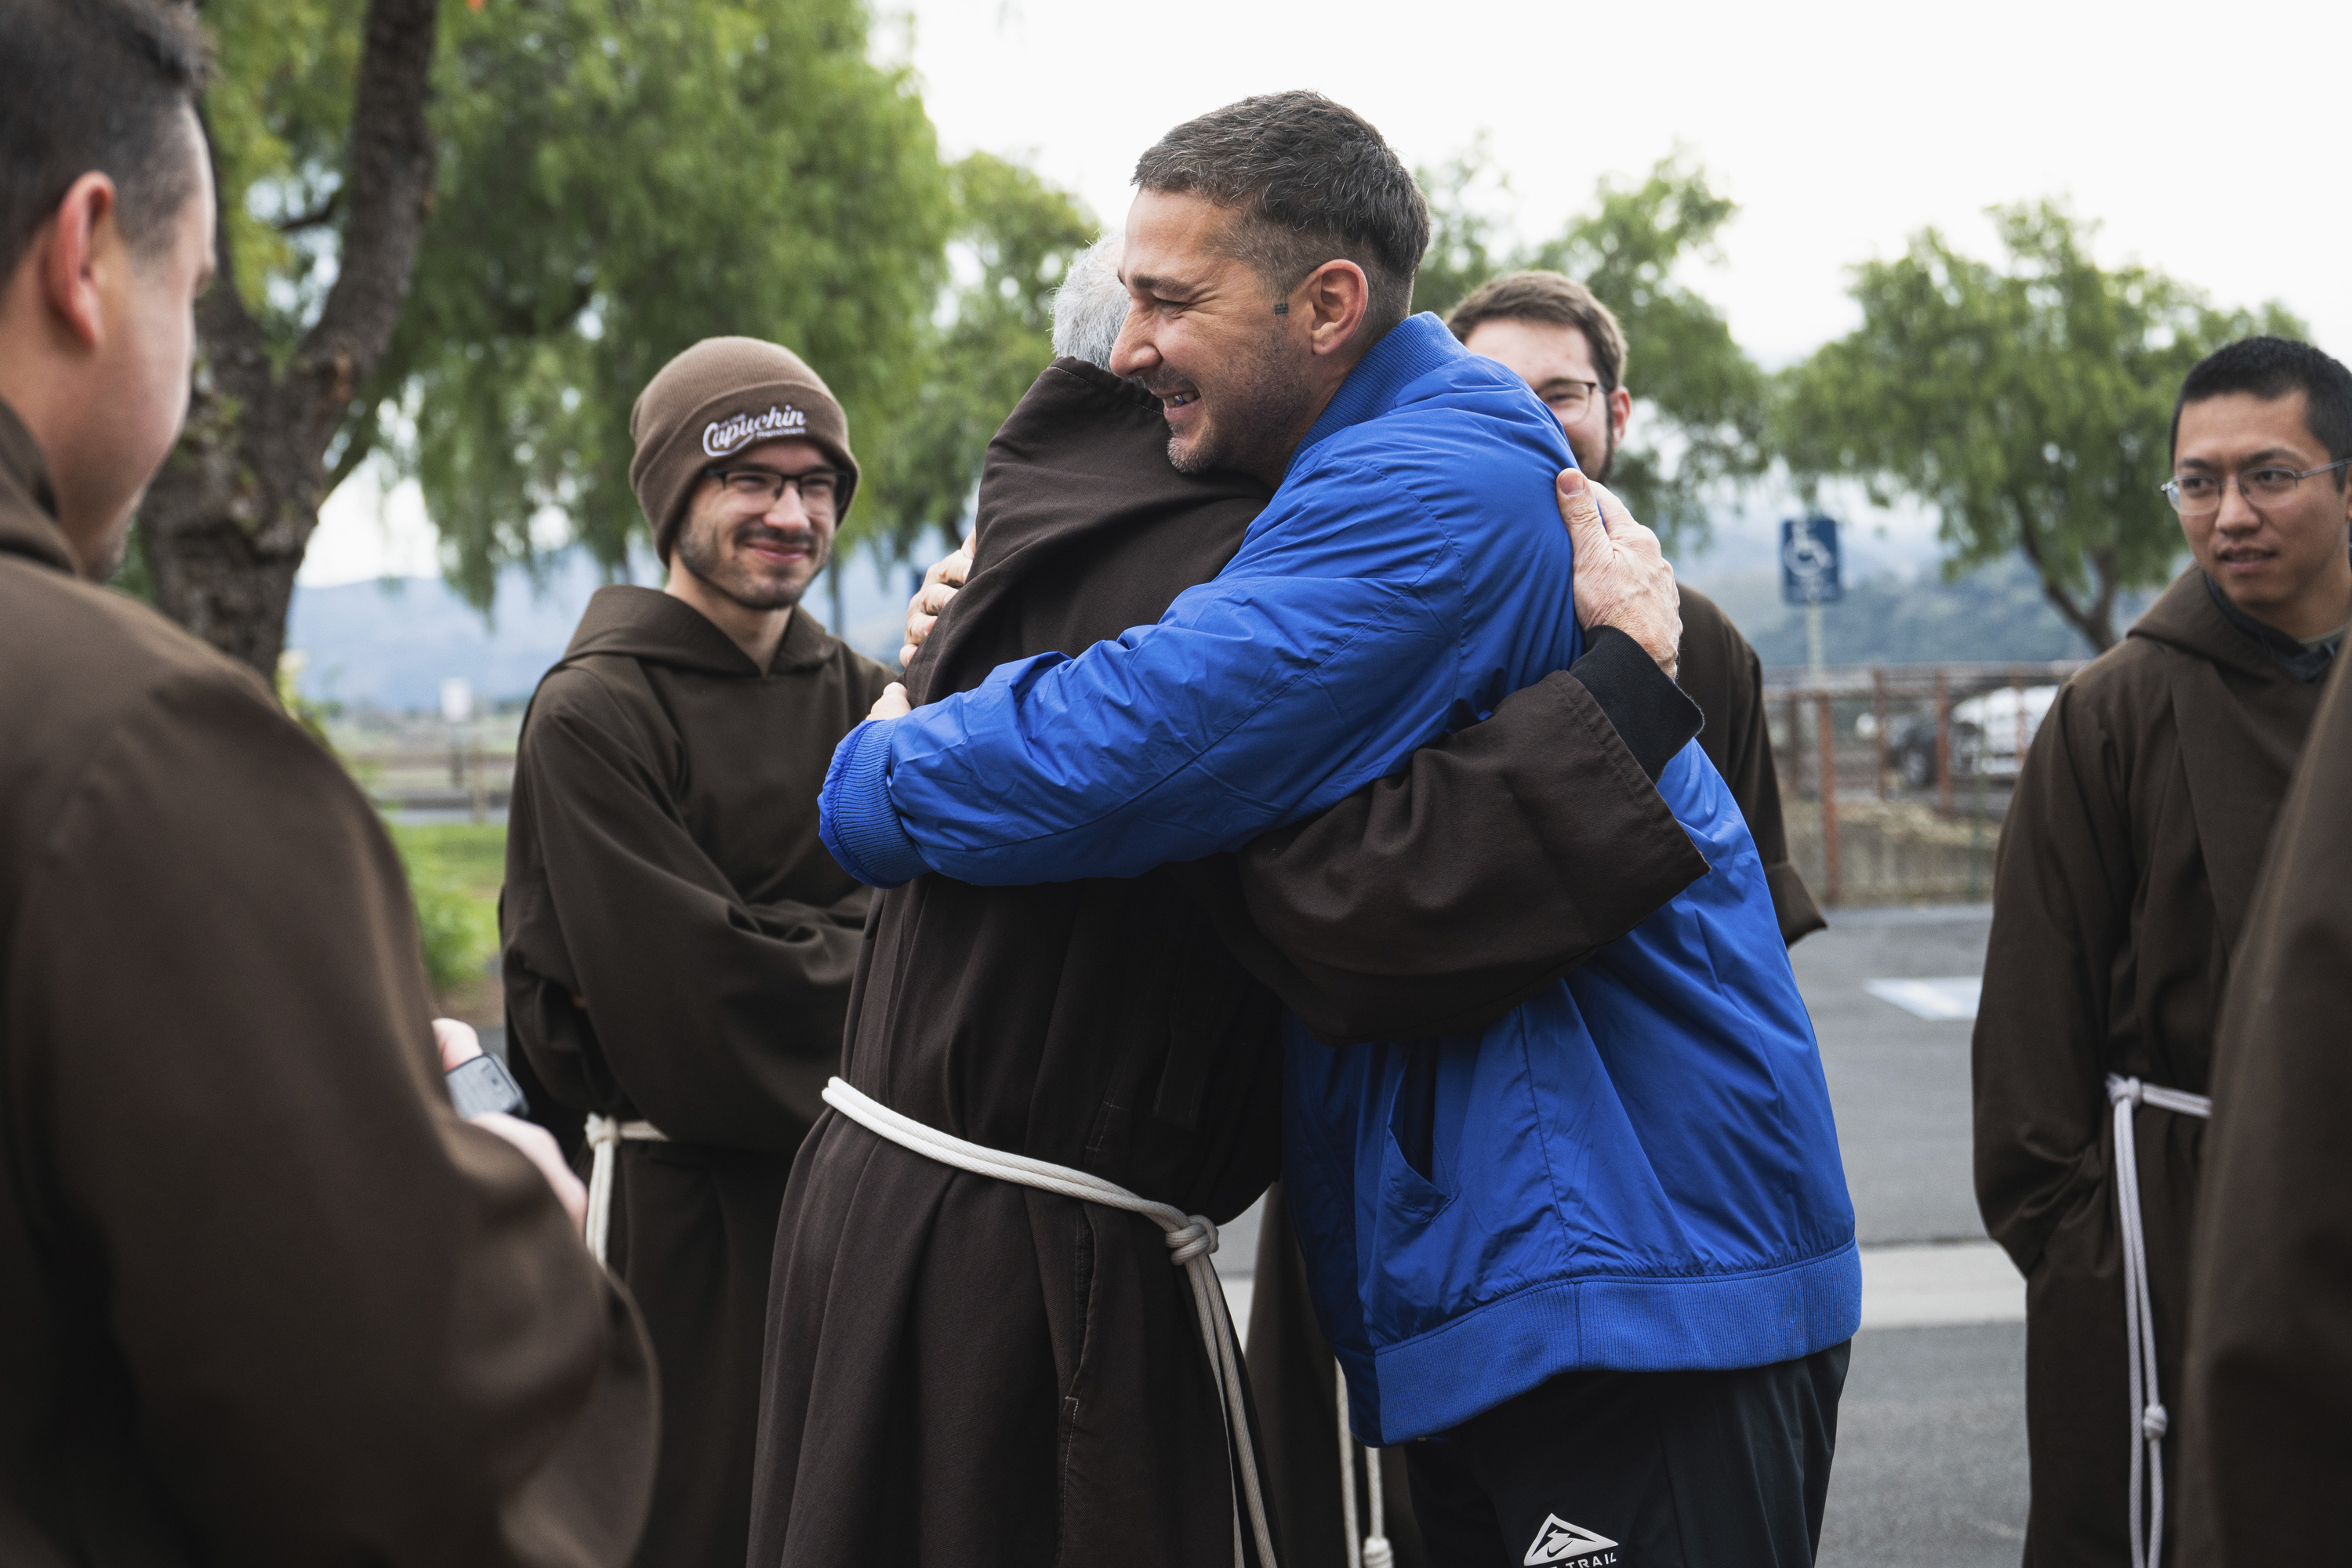 In this photo provided by Word on Fire Catholic Ministries, actor Shia LaBeouf celebrates his Catholic confirmation outside Old Mission Santa Inés Parish in Solvang, Calif., on Sunday, Dec. 31, 2023. “The Capuchin Franciscan friars are overjoyed to welcome him into the fold and witness his deep commitment to his faith journey,” the Catholic religious order said. (Word on Fire Catholic Ministries via AP)